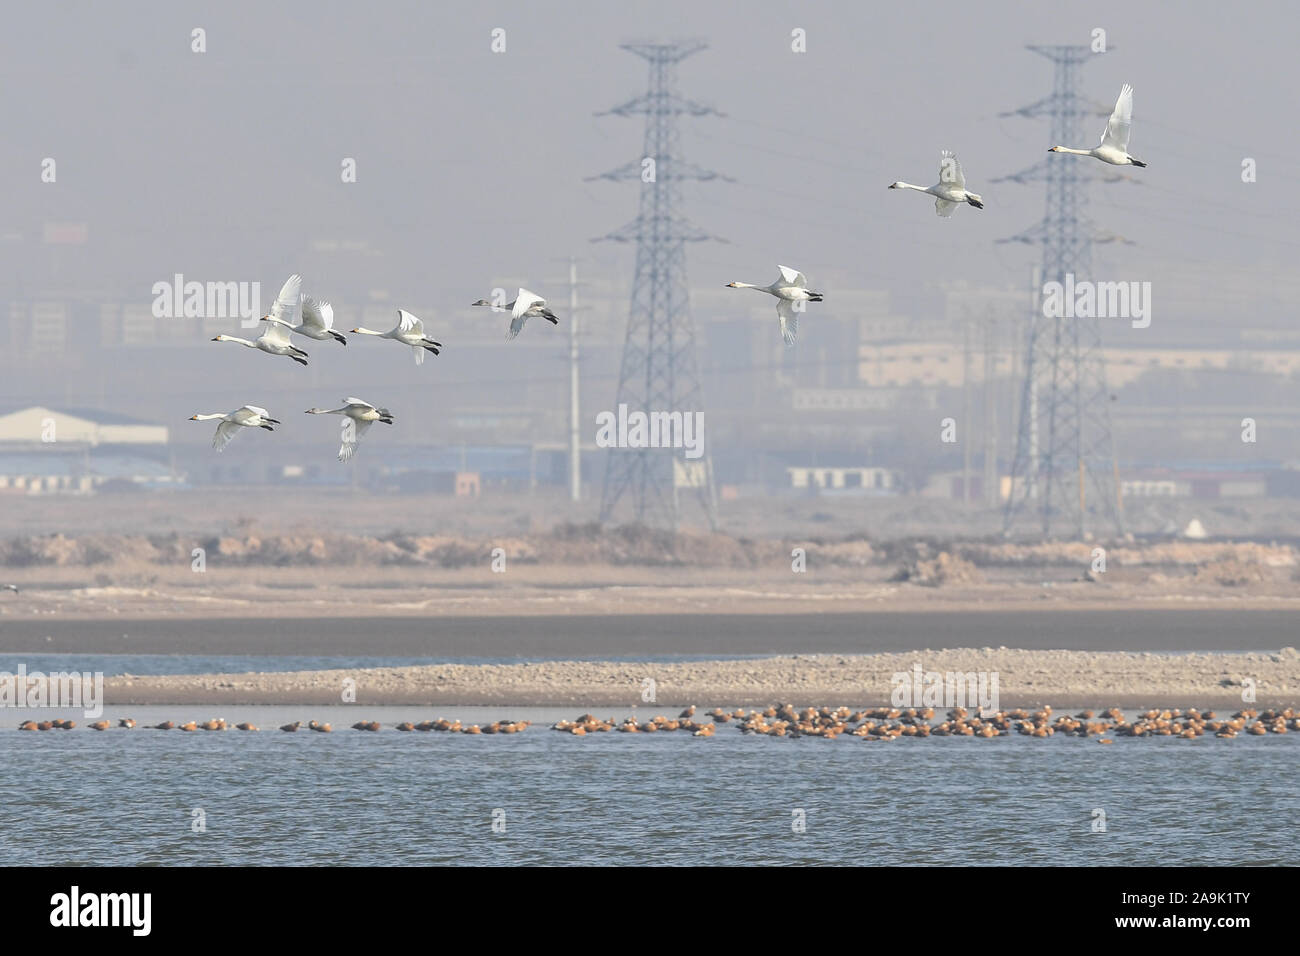 (191116) -- HOHHOT, Nov. 16, 2019 (Xinhua) -- Photo taken on Nov. 16, 2019 shows migrant birds at the Hailiu reservoir in Tumd Left Banner in north China's Inner Mongolia Autonomous Region. A large number of migrant birds have recently stopped at the reservoir for a break before flying to the south. (Xinhua/Liu Lei) Stock Photo